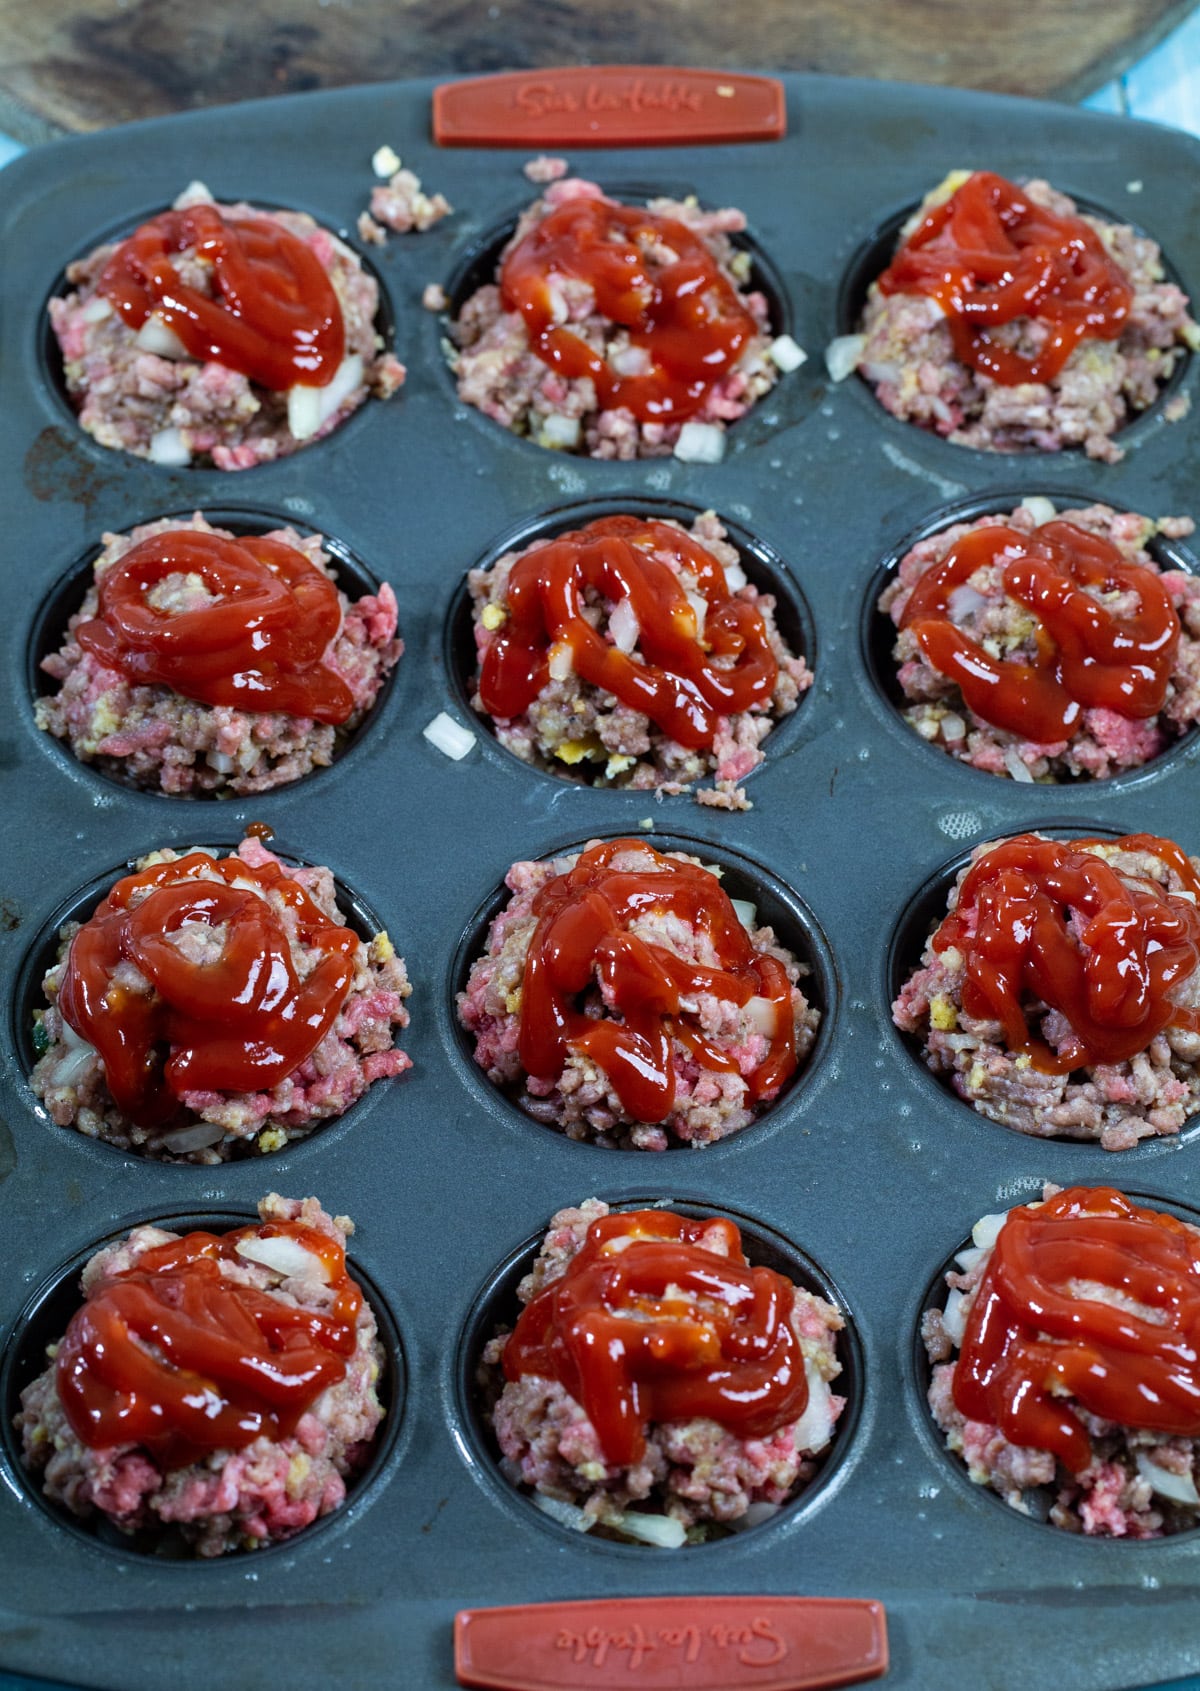 Ketchup on top of muffins.